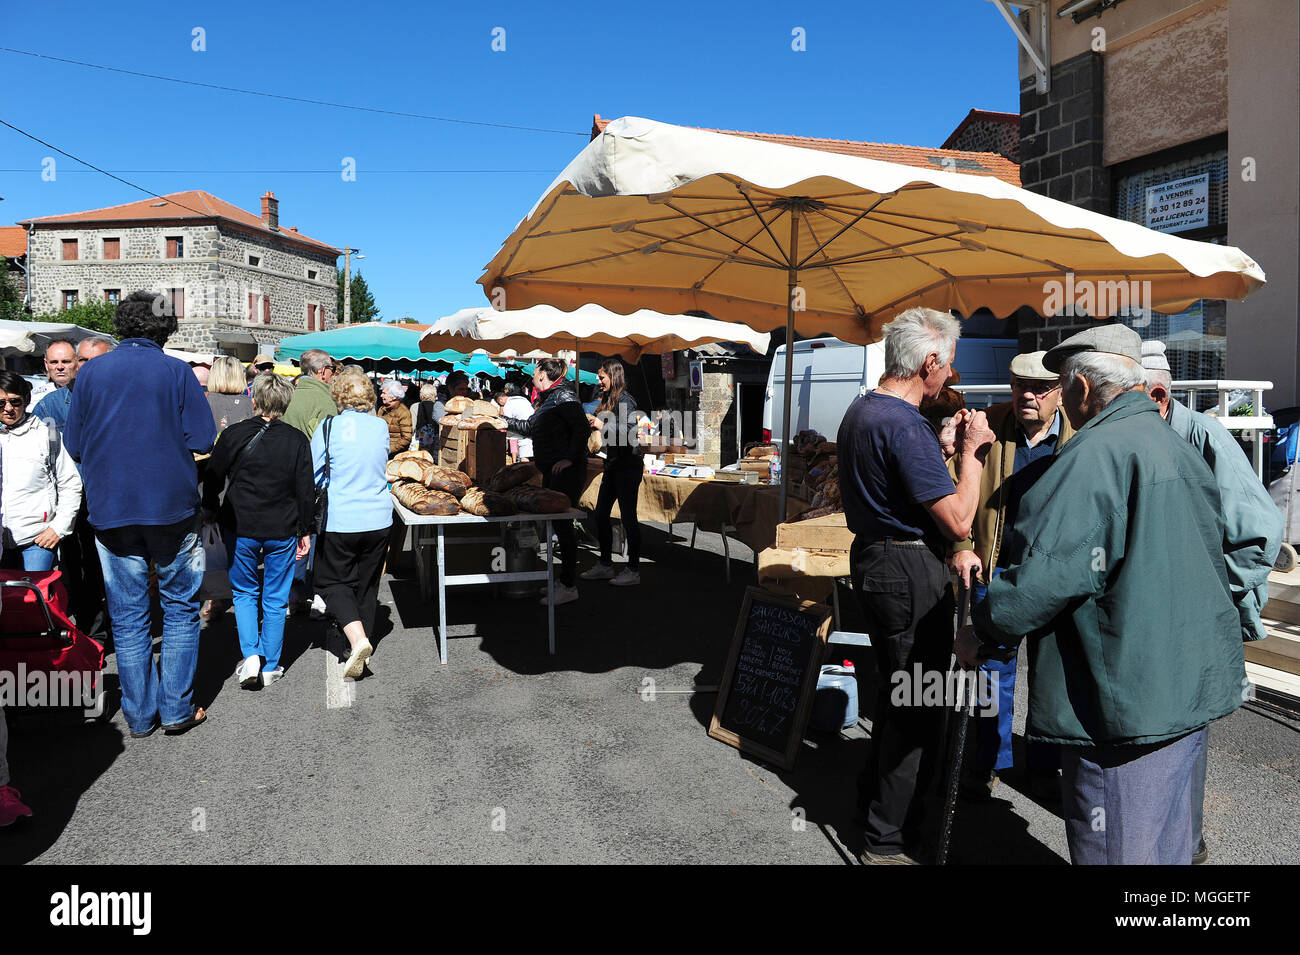 Haute-Loire, France - The weekly market of Costaros - one of the largest ones in the Le Puy region - offers local and organic products. Stock Photo